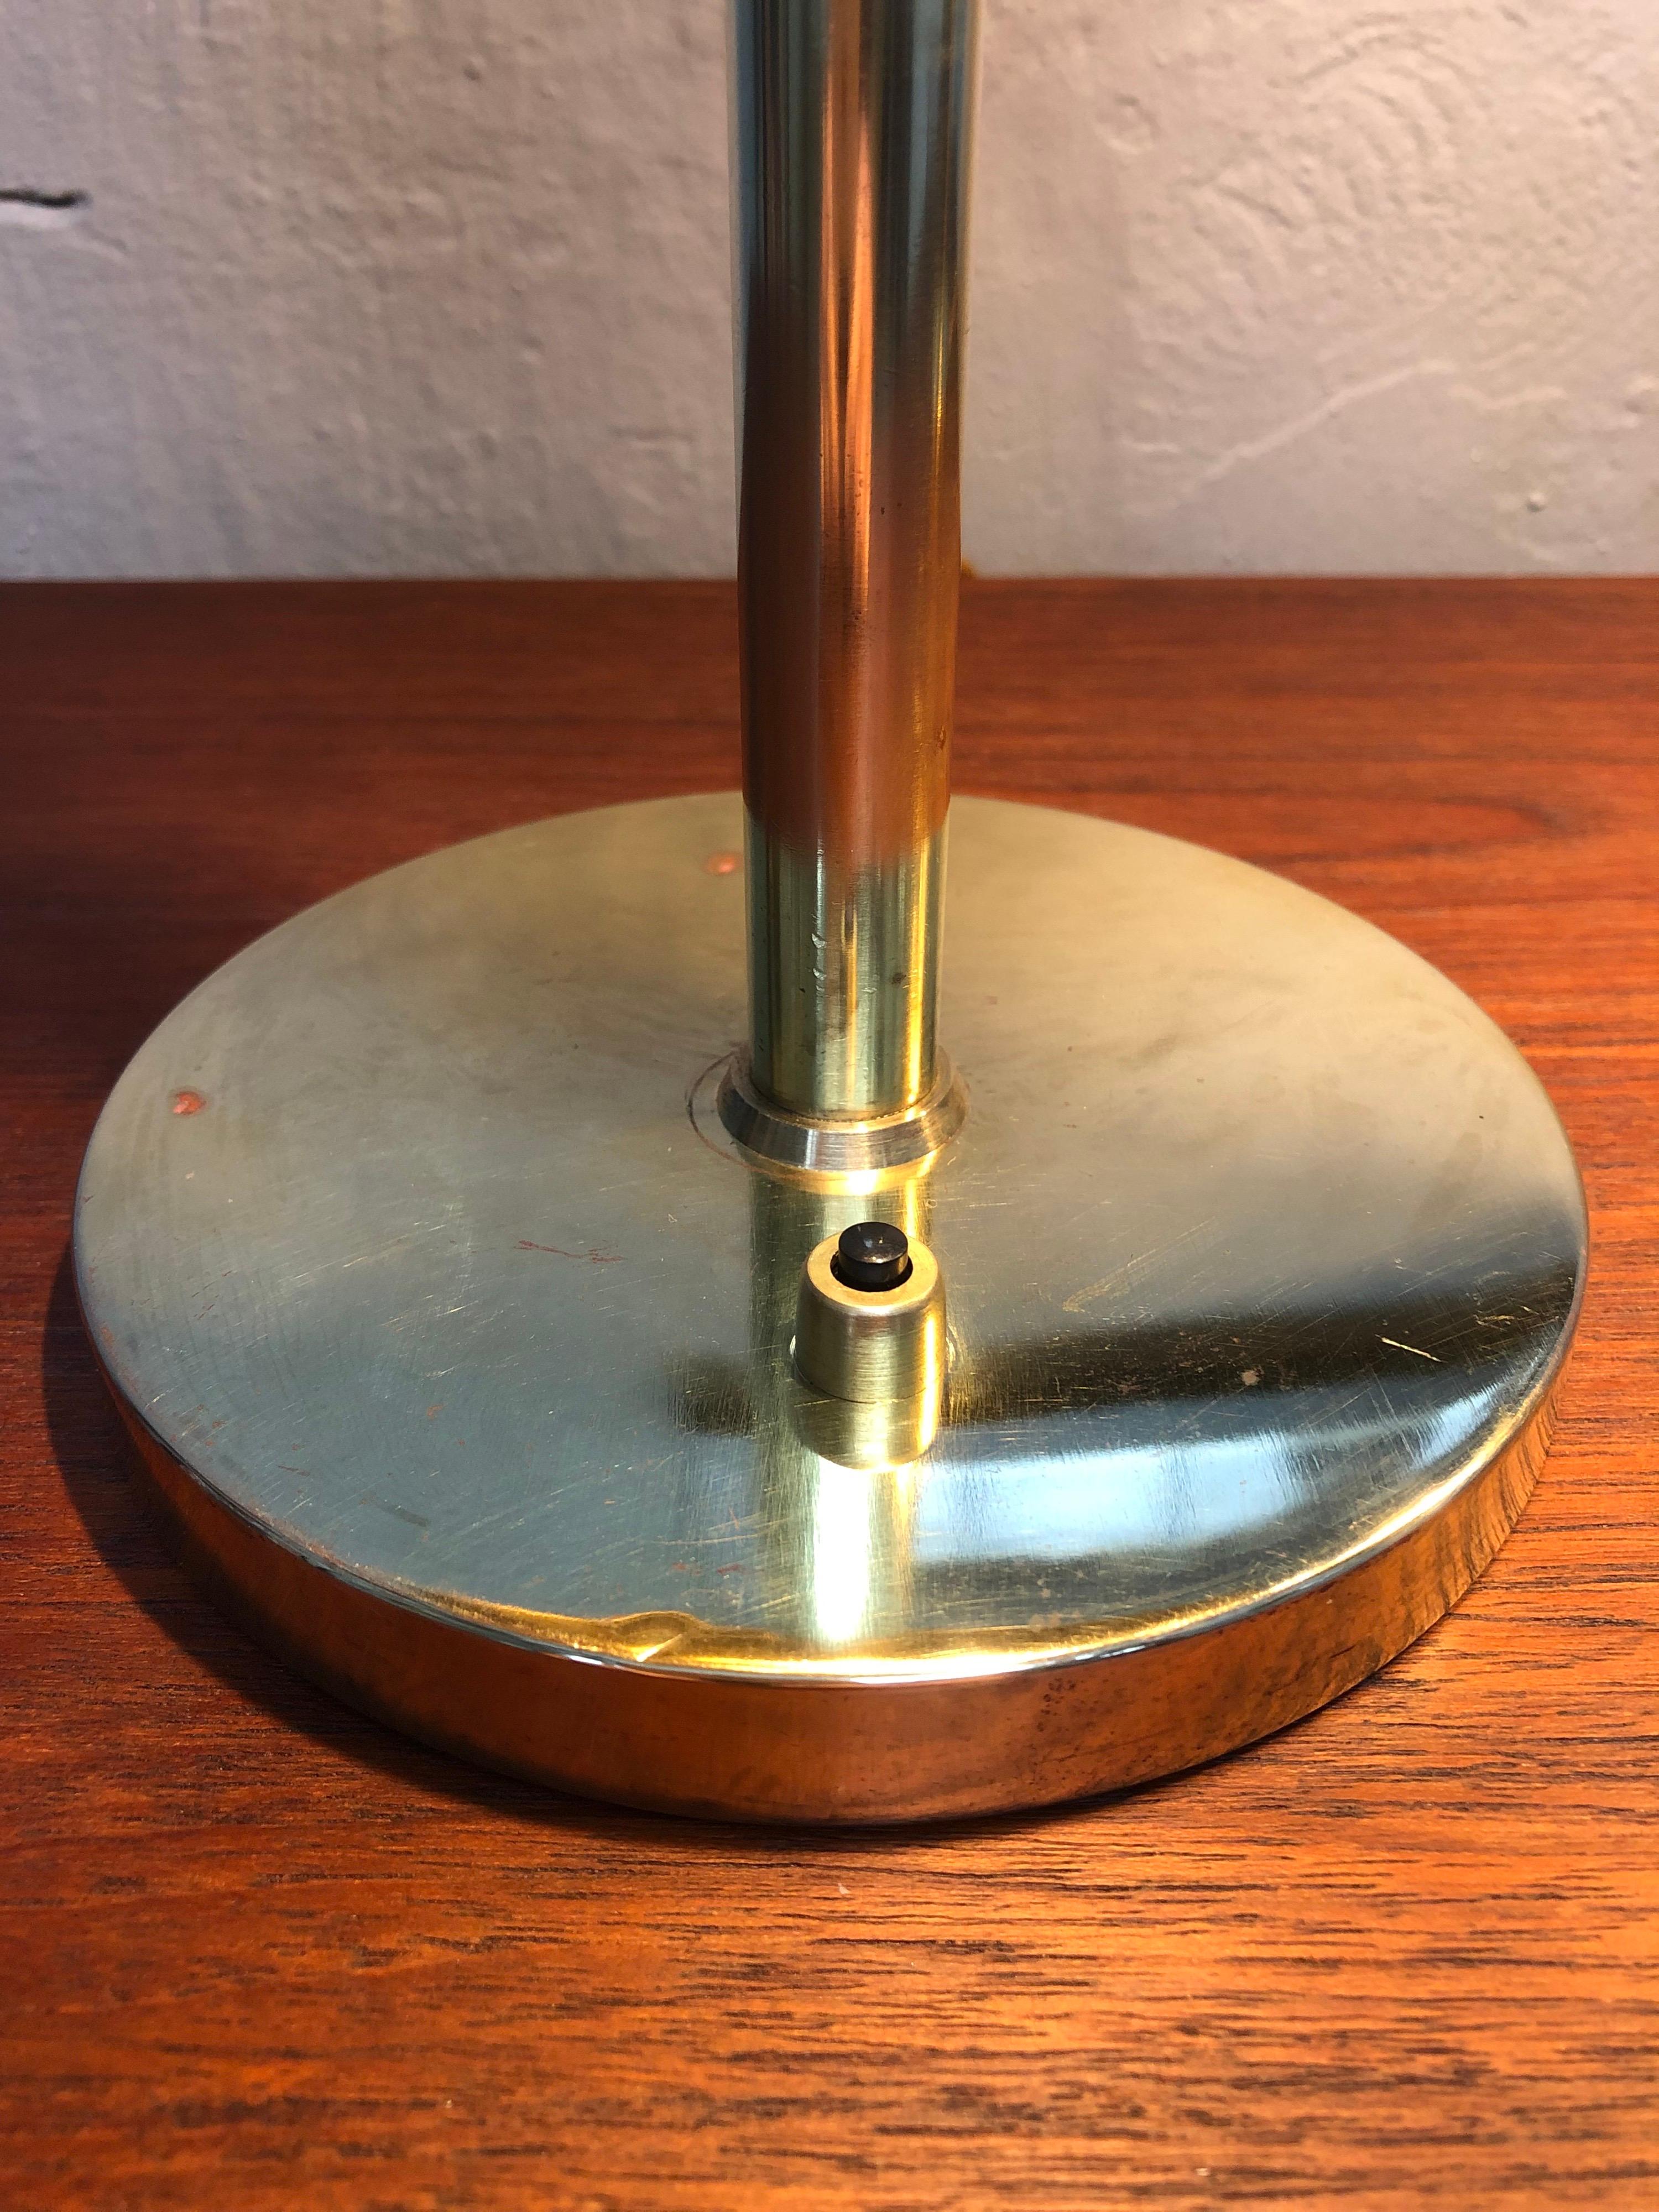 Hand-Crafted A Pair of Danish Modernist Table Lamp in Brass from the 1940s by Lyfa